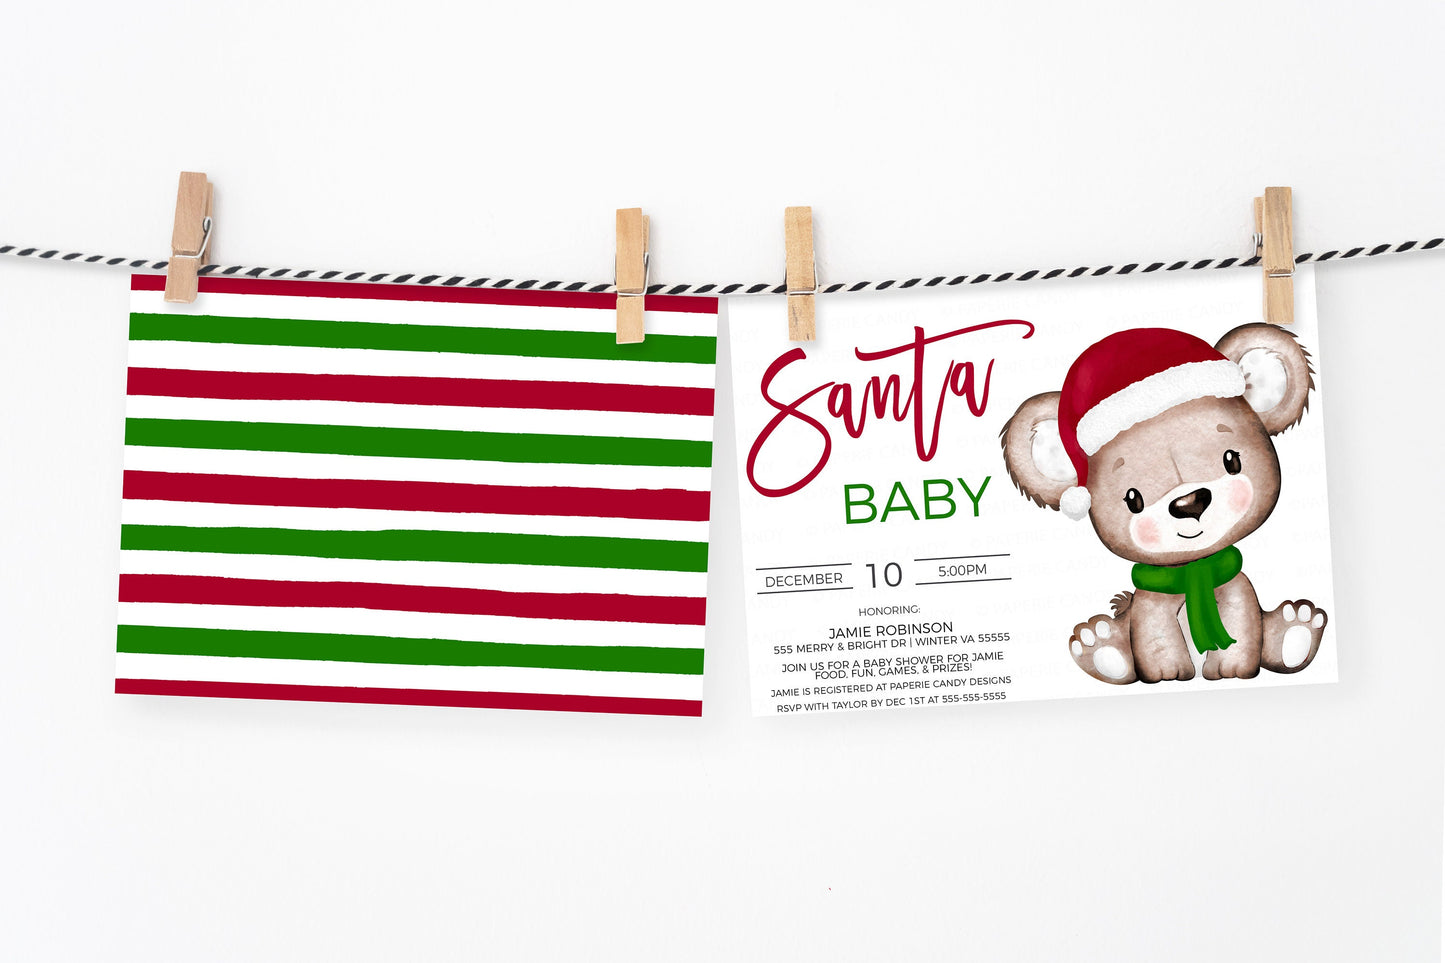 Christmas Baby Shower Invitation, Santa Baby Invite, Boy Girl Twin Shower, Christmas General Reveal Party, Editable Printable Template